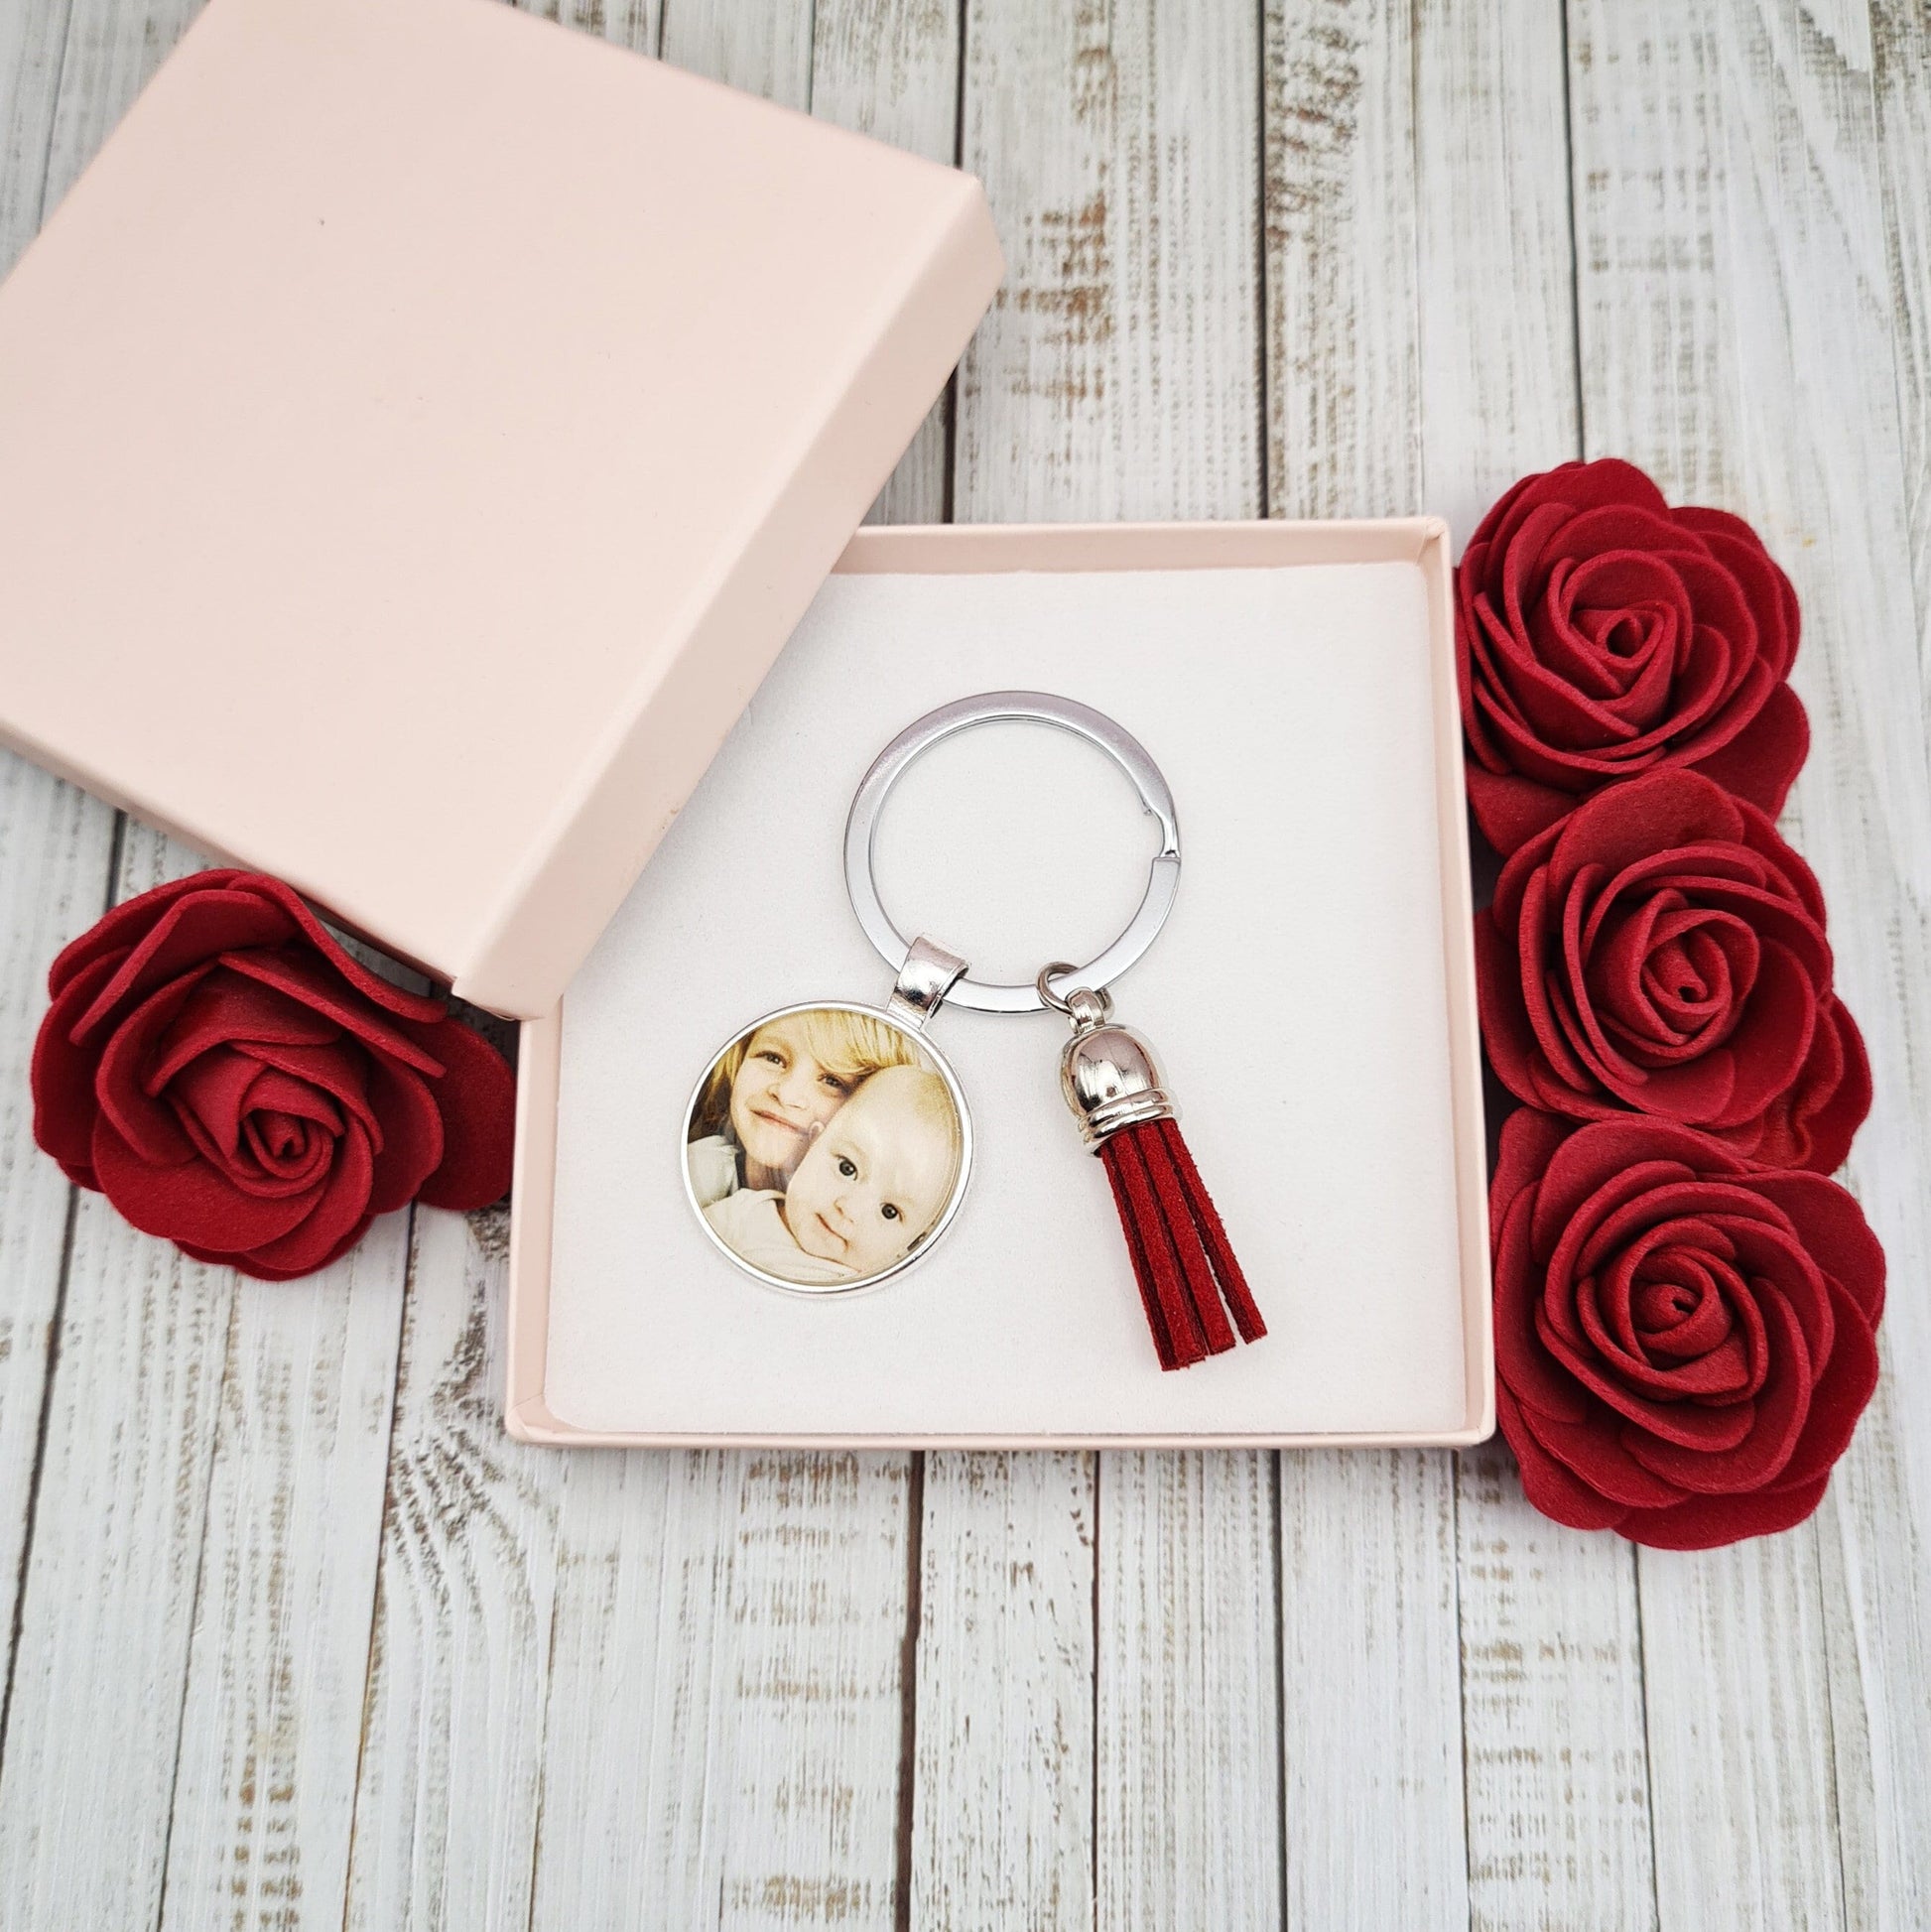 Silver key ring with pendant personalised with a photo and a tassel inside a pink gift box